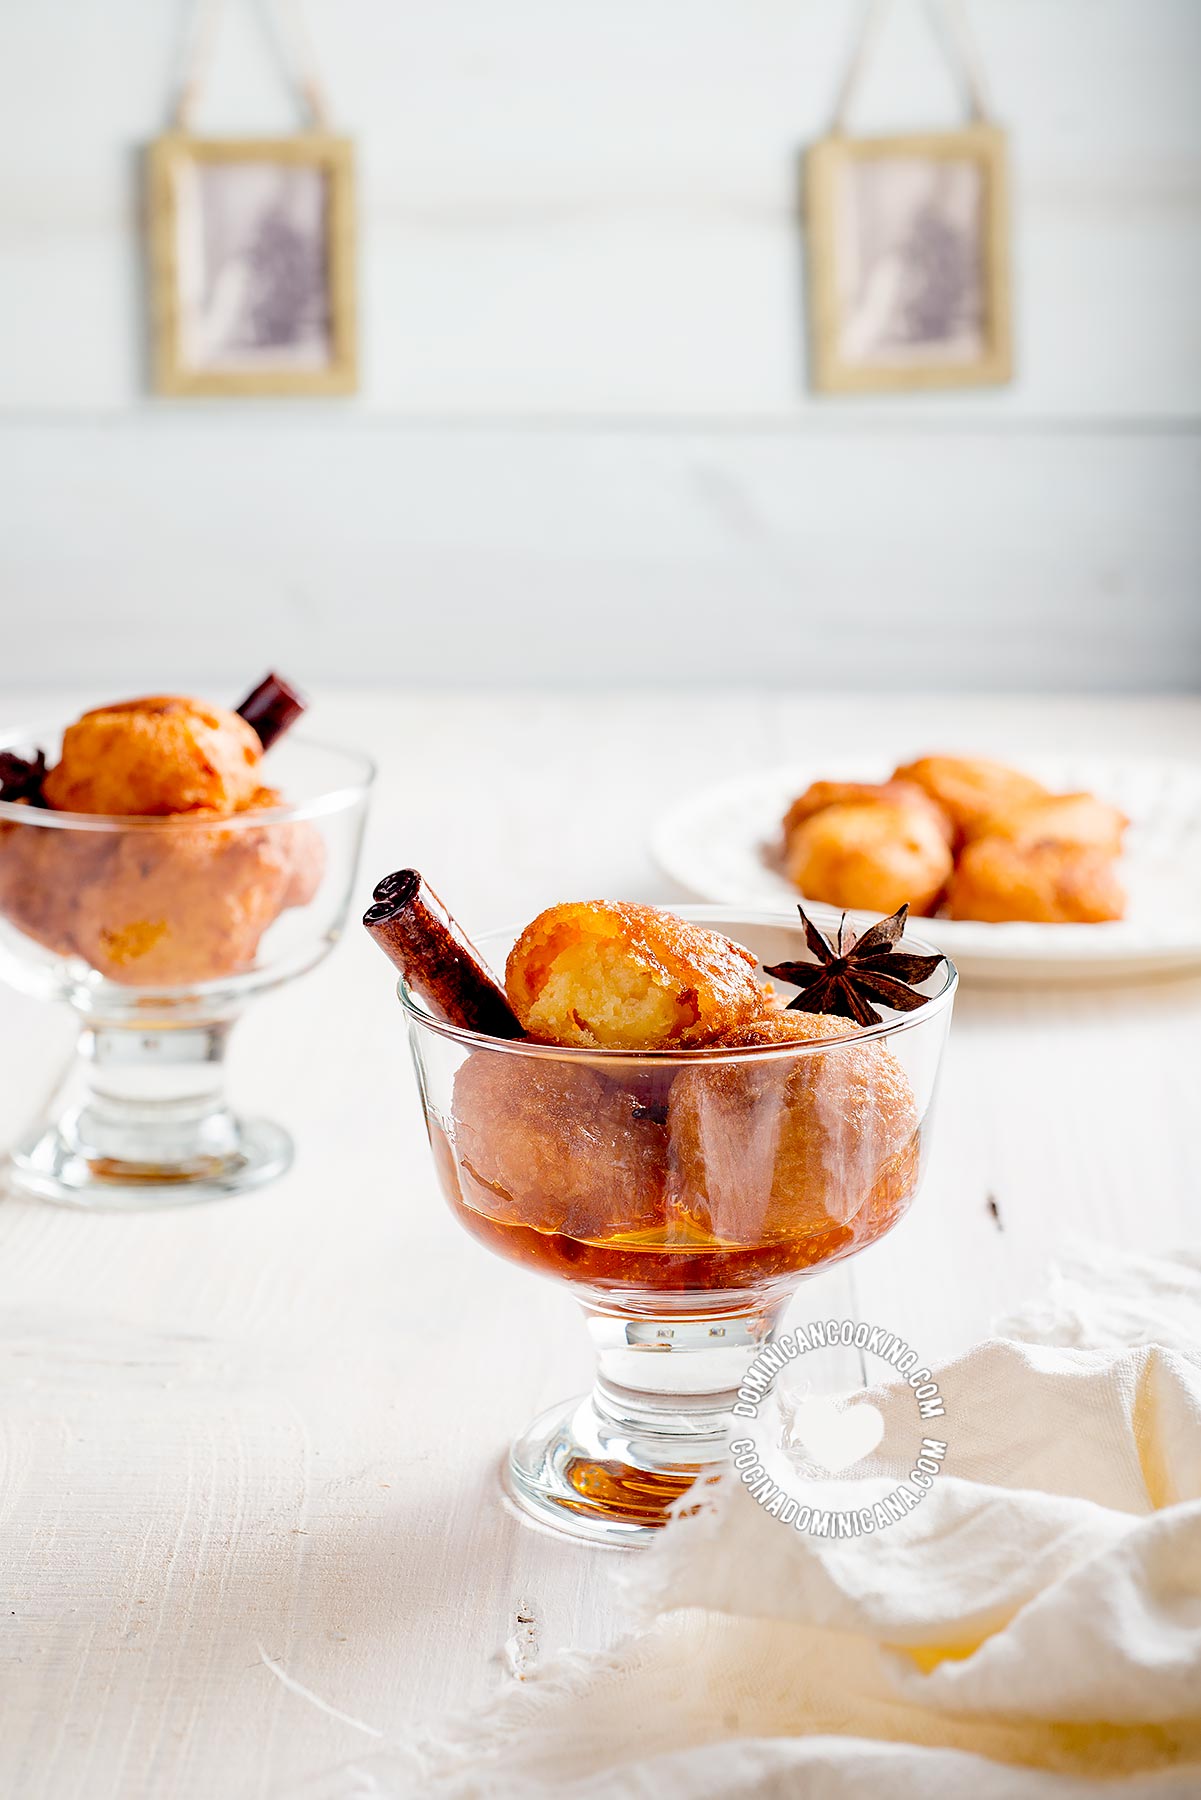 Buñuelos de yuca (cassava sweet puff fritters with spiced syrup).